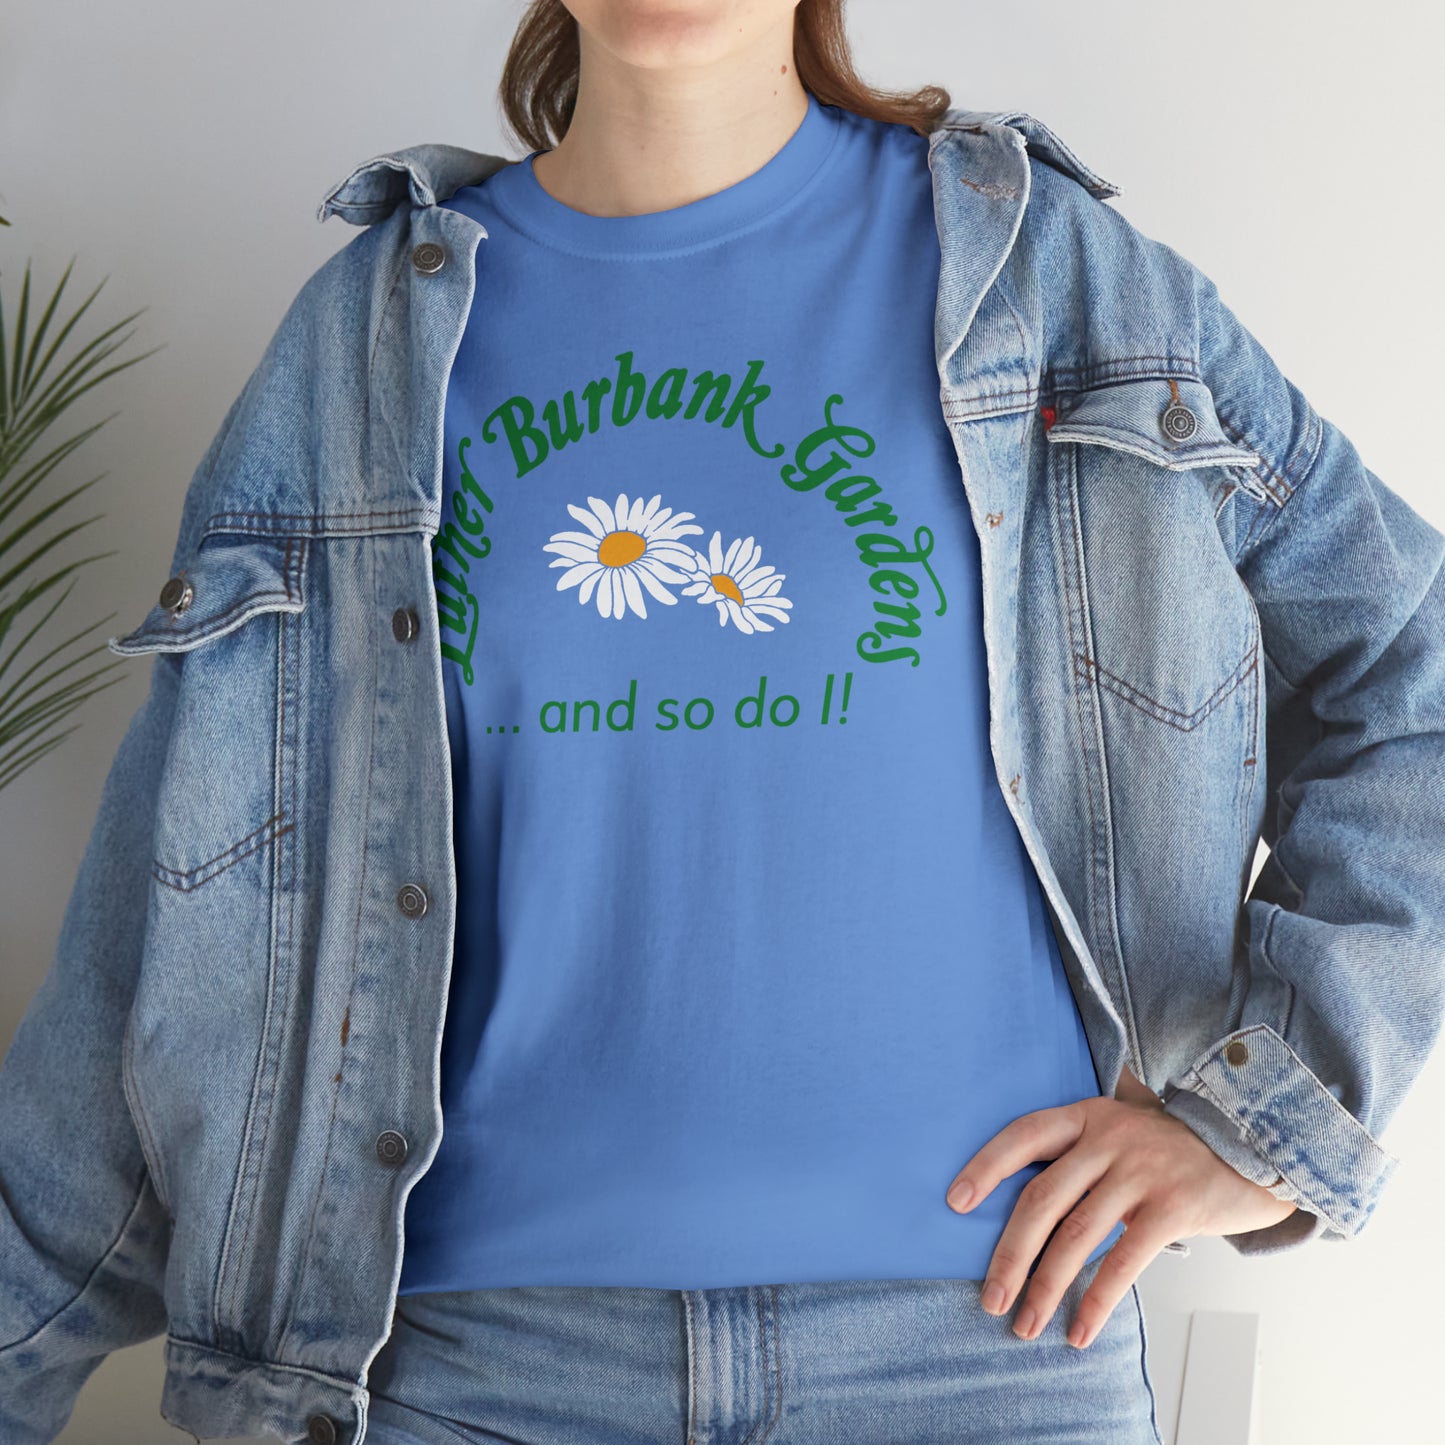 Luther Burbank Gardens ... and so do I! Tee